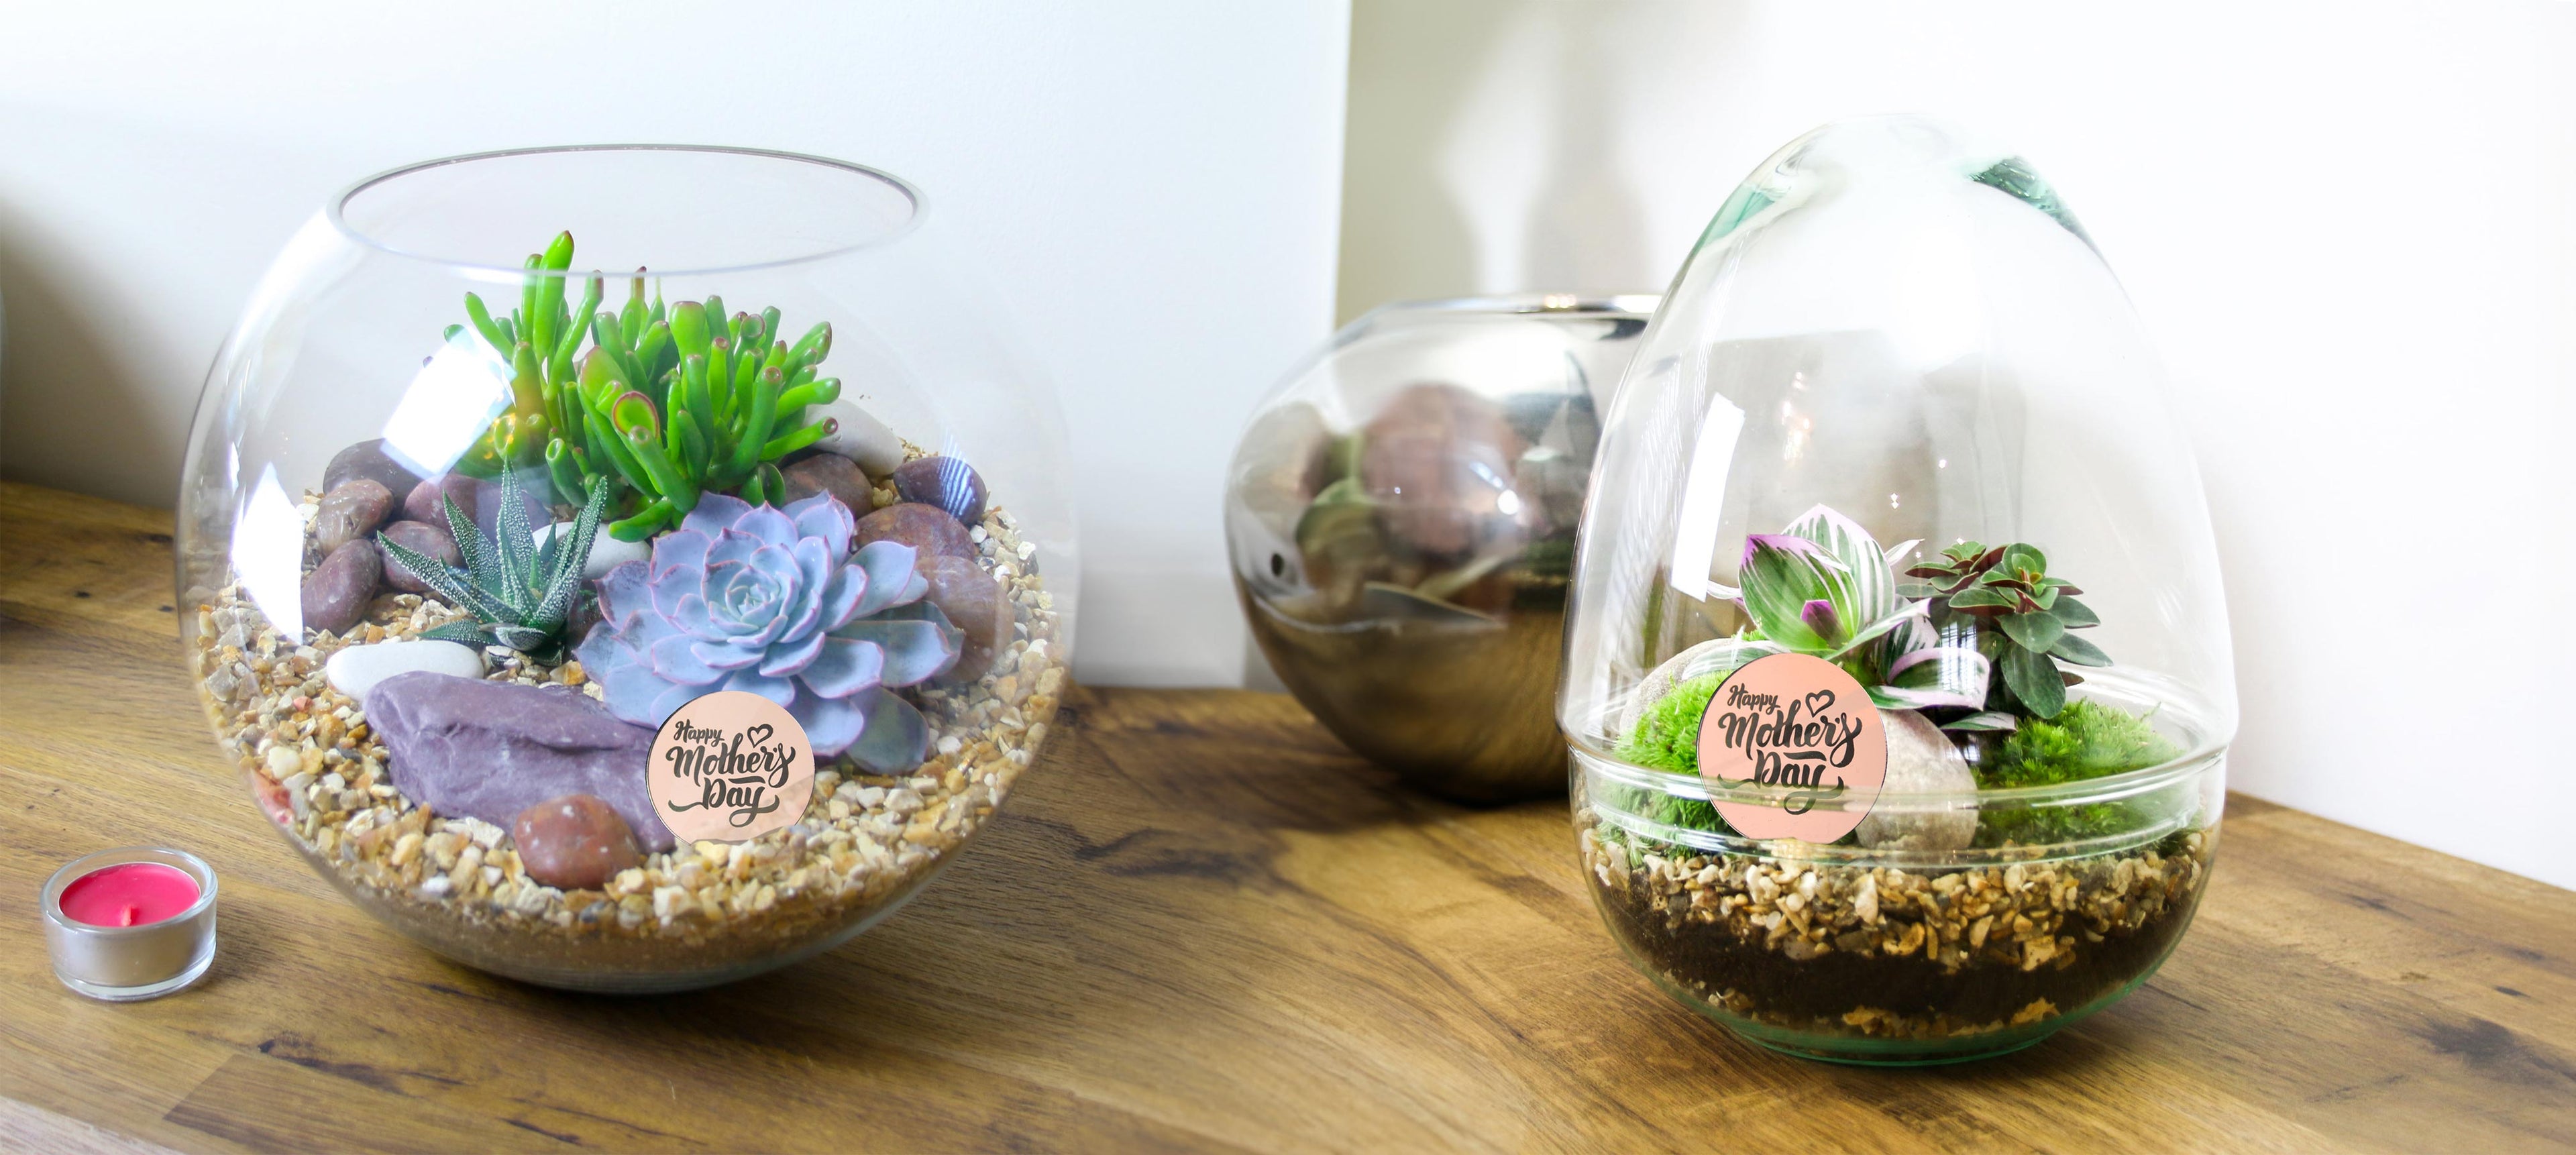 Mother's Day terrarium gift ideas with living plants